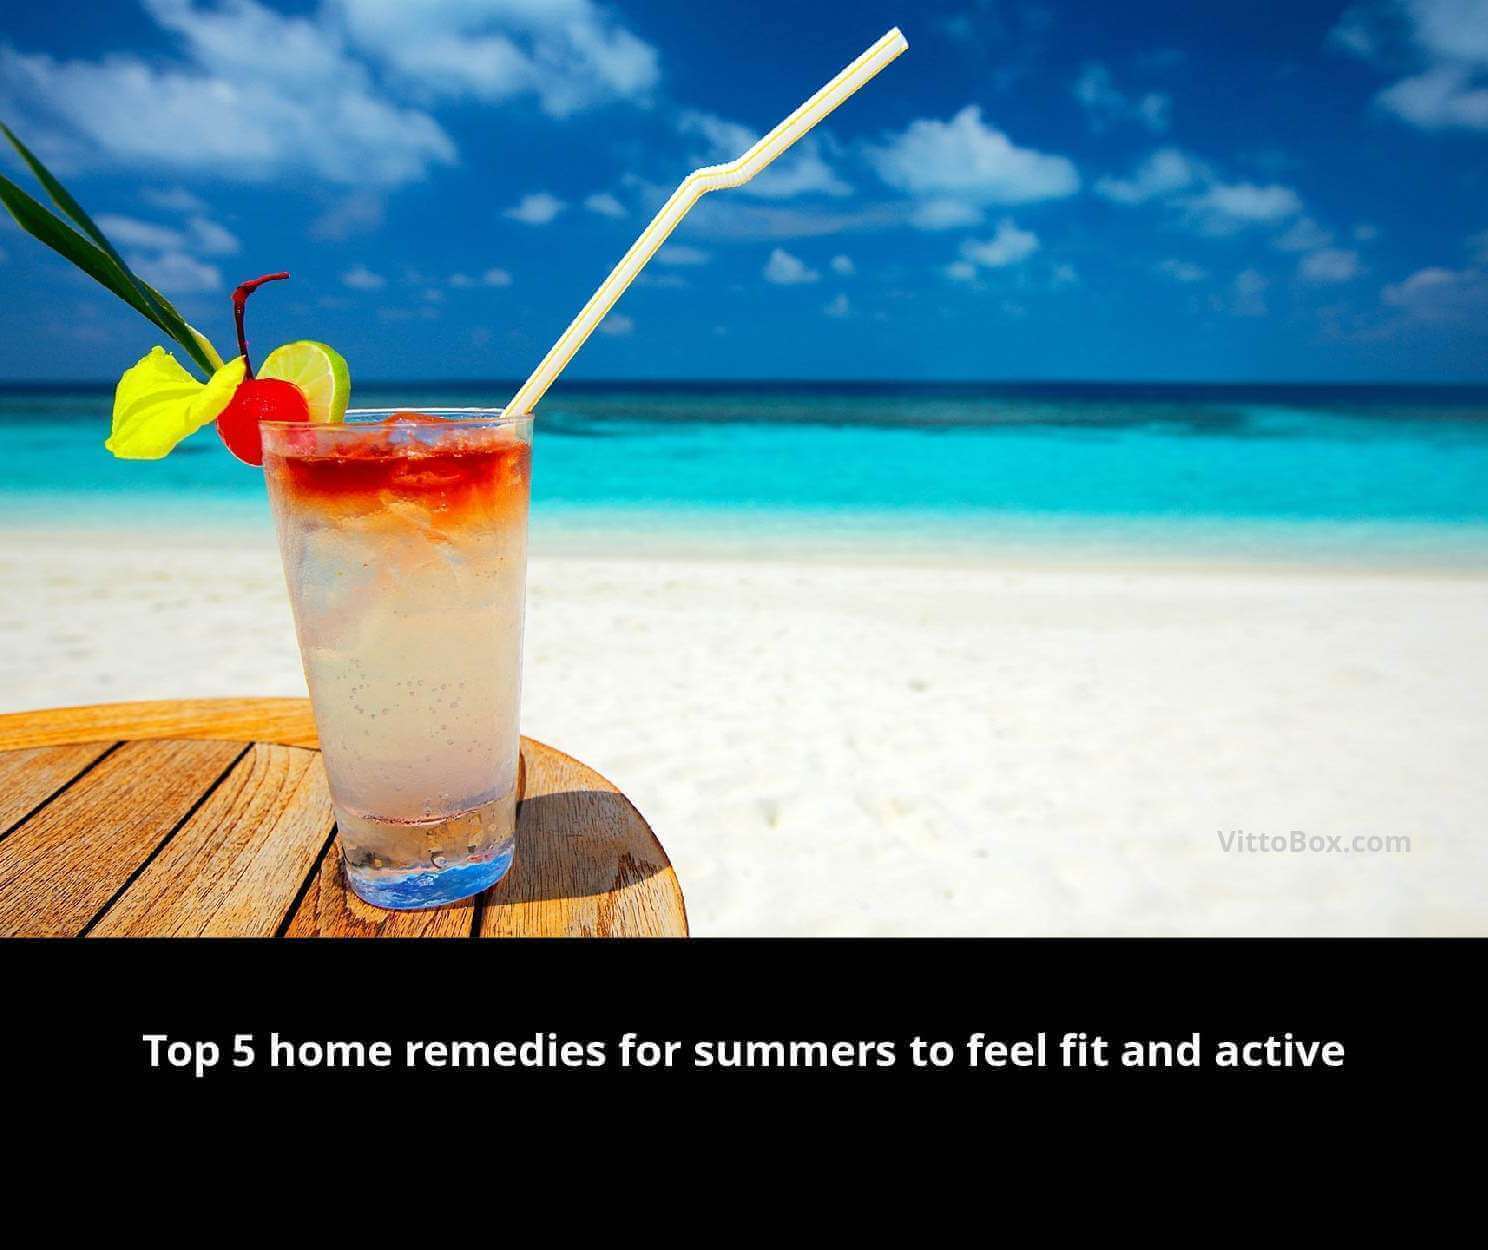 Top 5 Home Remedies For Summers To Feel Fit And Active